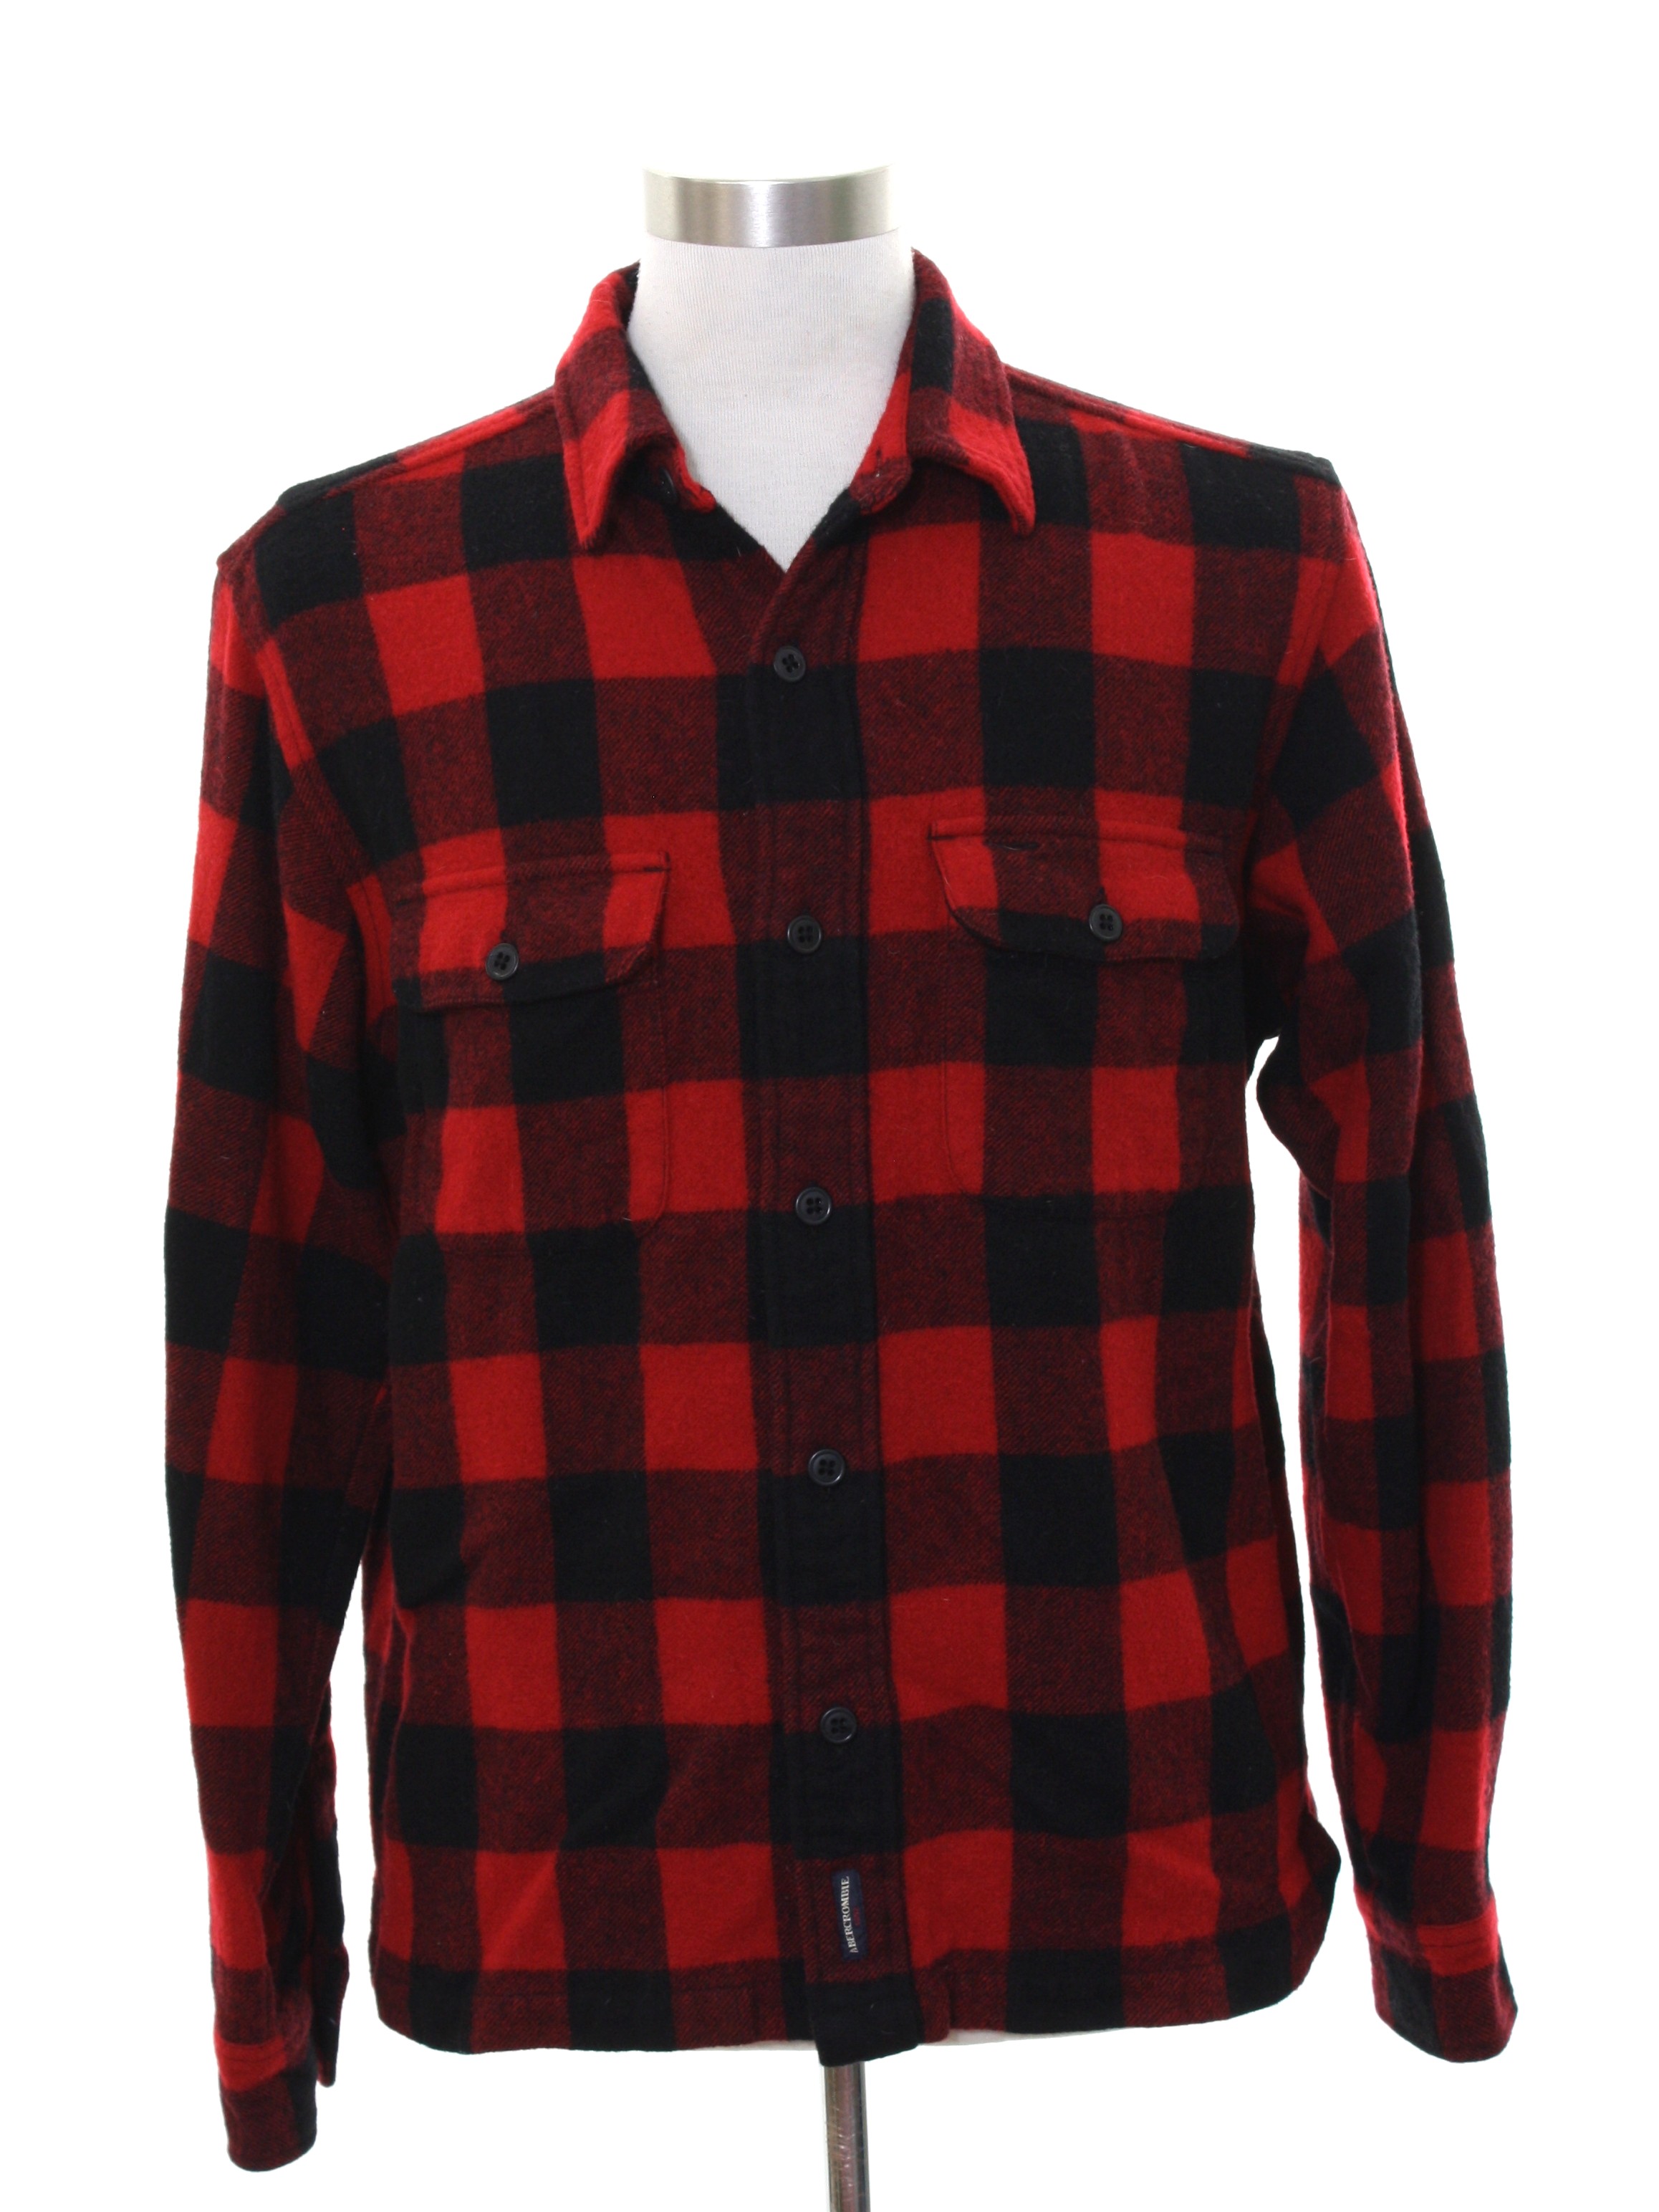 abercrombie & fitch flannel shirts